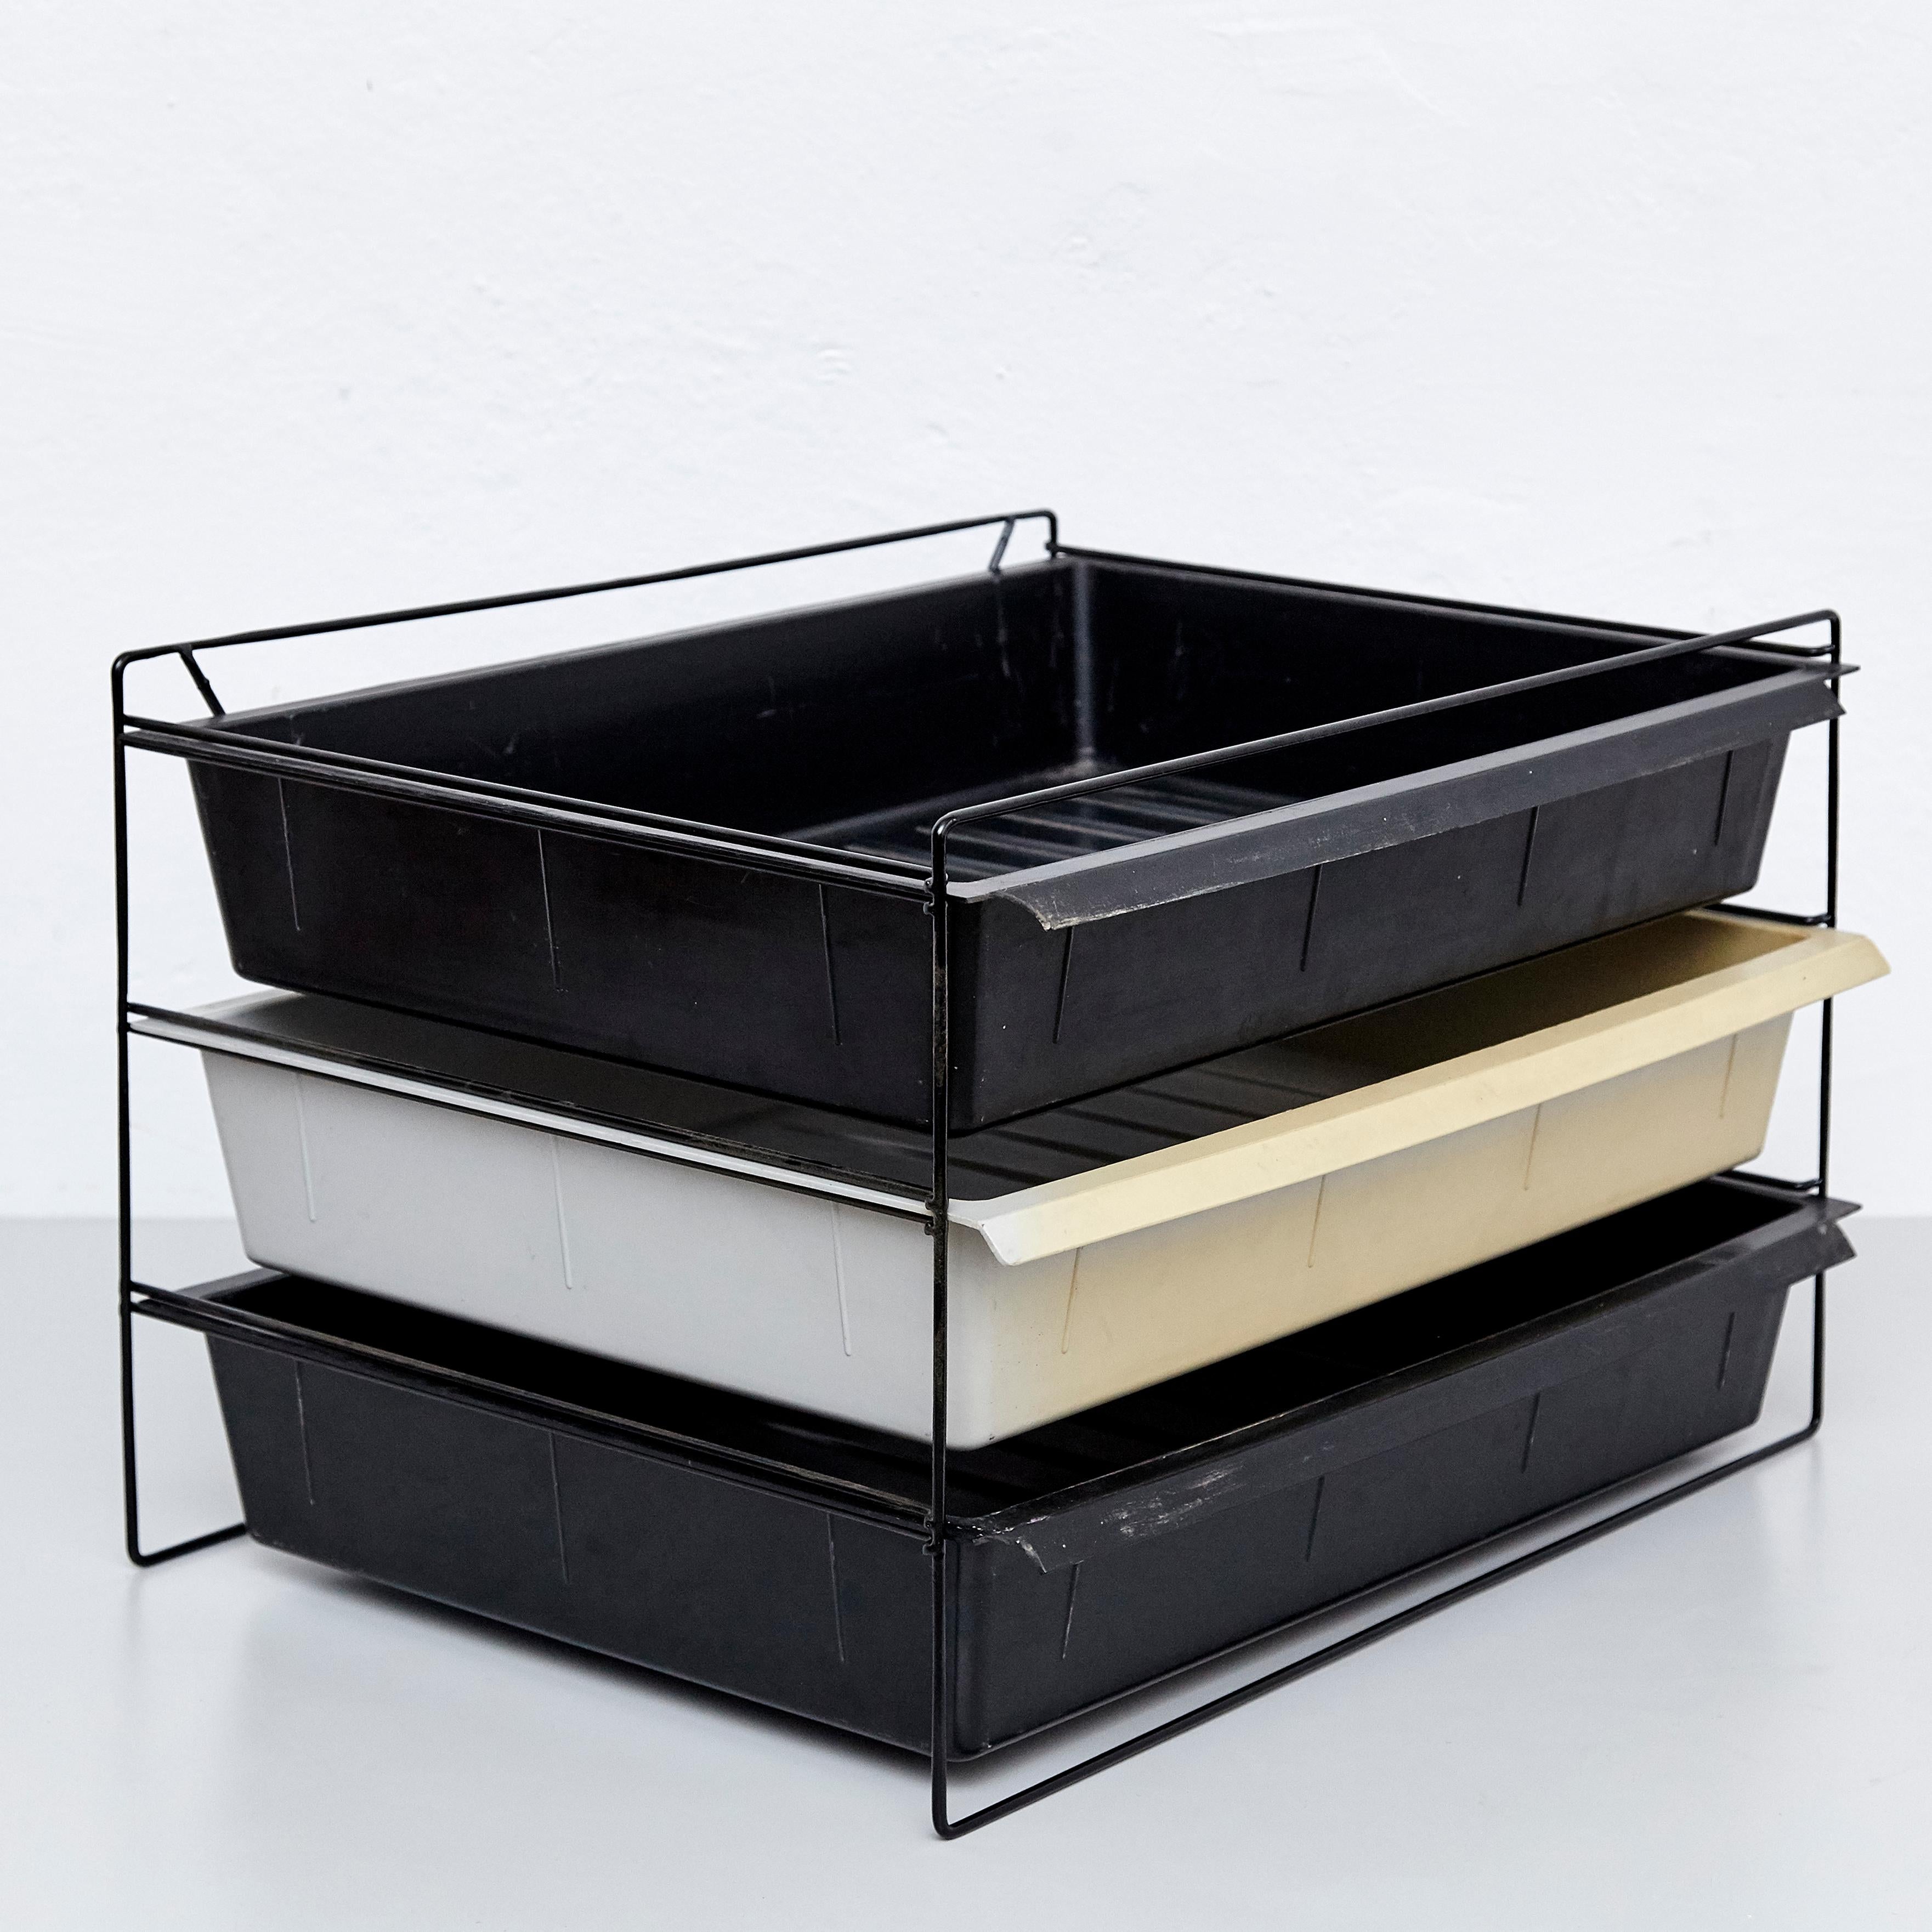 French Charlotte Perriand Mid-Century Modern Metal and Plastic File Rack, circa 1950